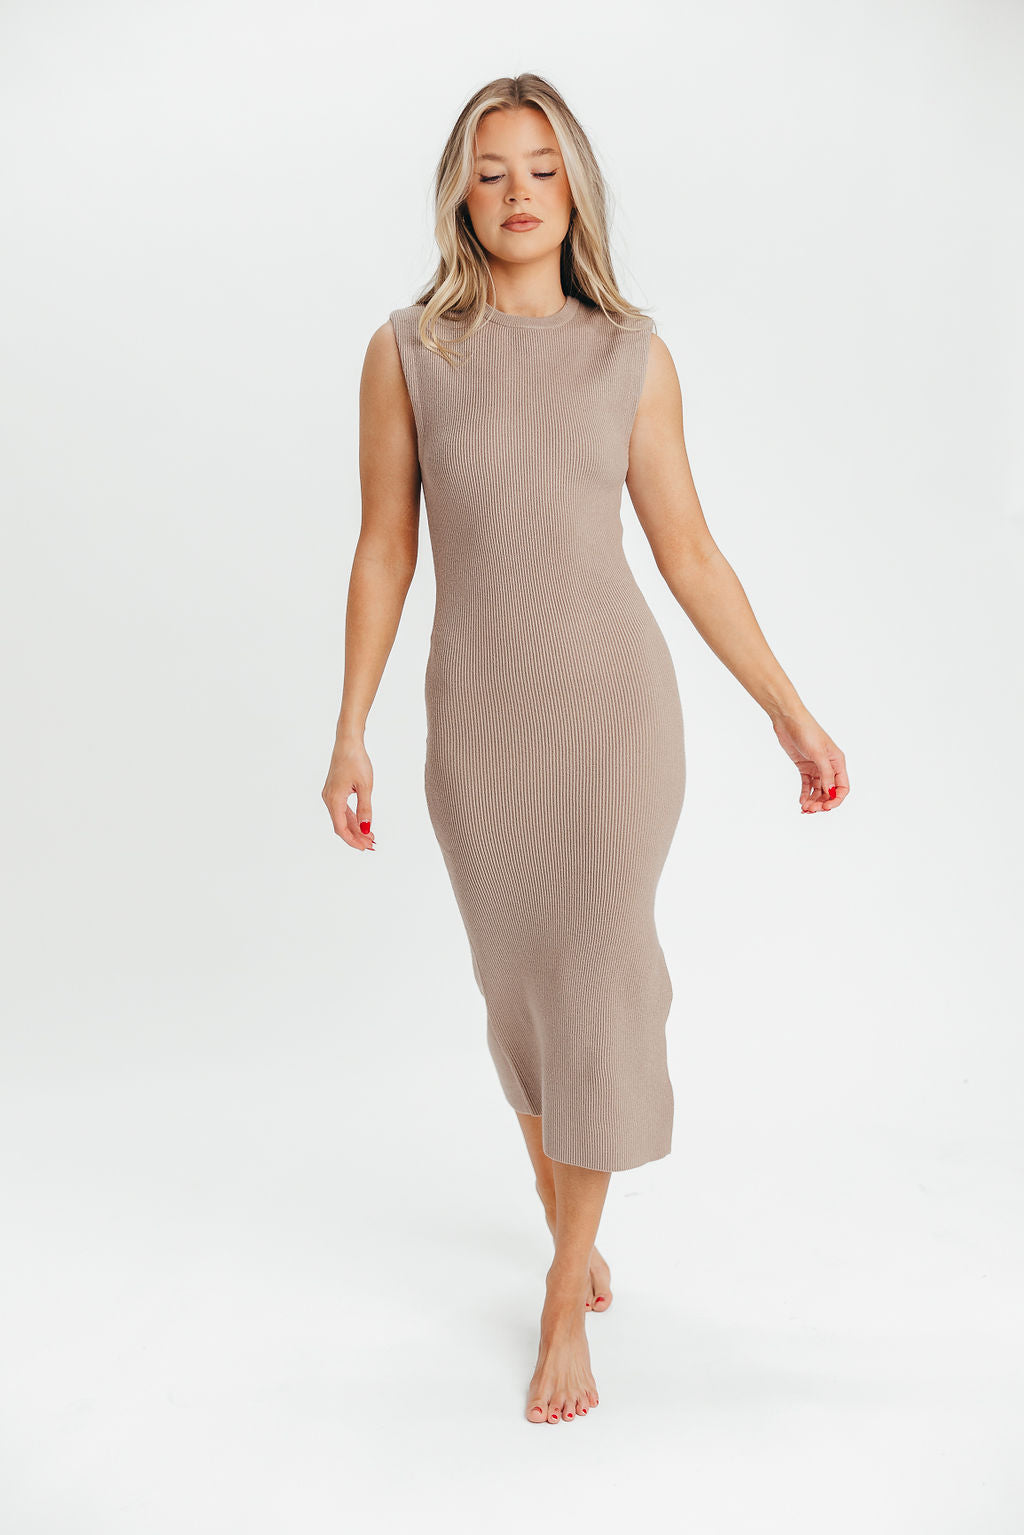 Iris Power Shoulder Ribbed Midi Dress in Taupe